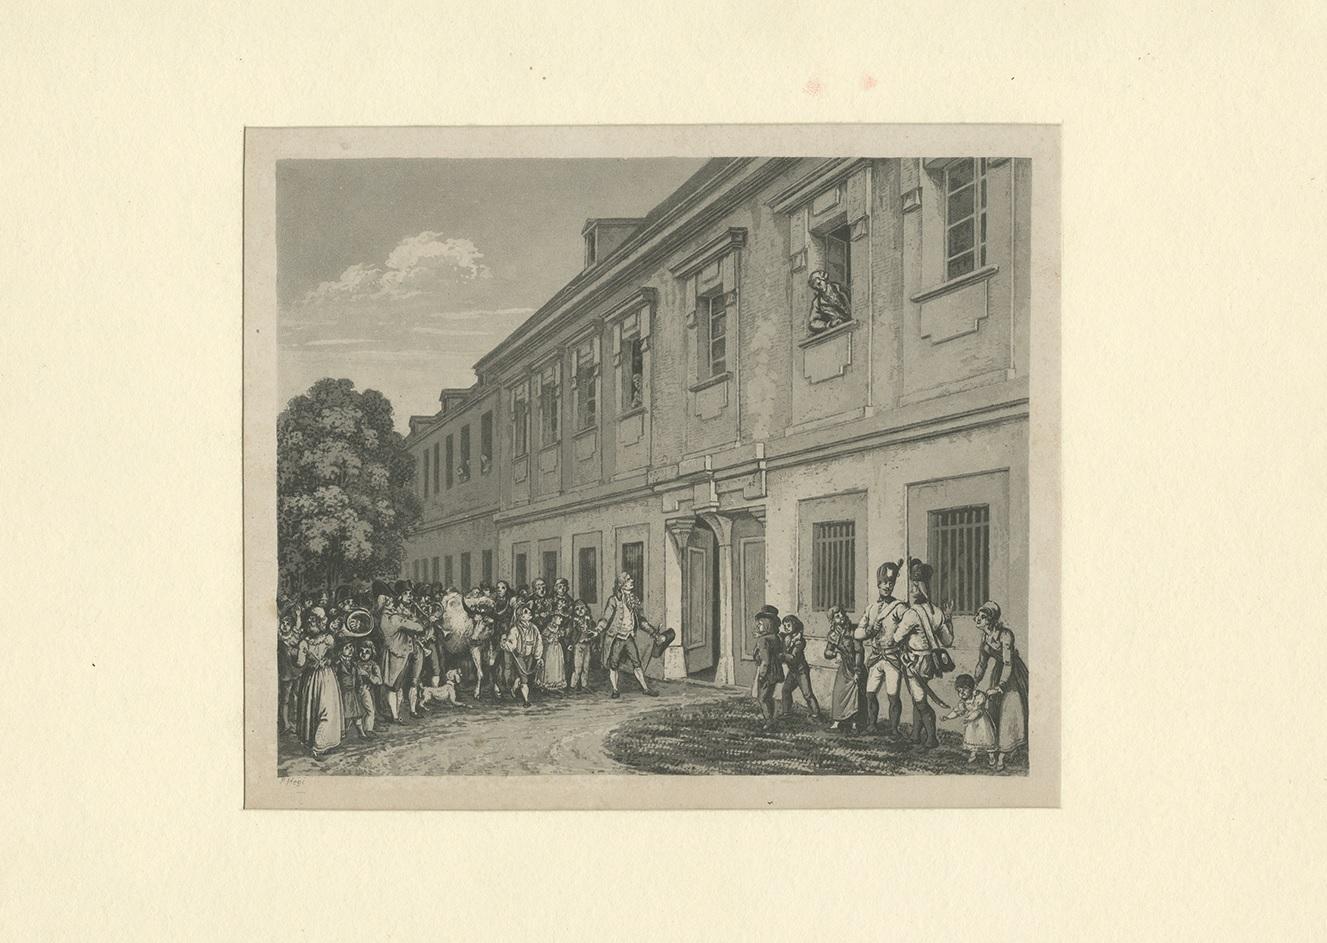 Antique print showing a building in Vienna, Austria. Depicted are soldiers, musicians, animals and other figures. Signed F. Hegi. This print includes a passé part out.